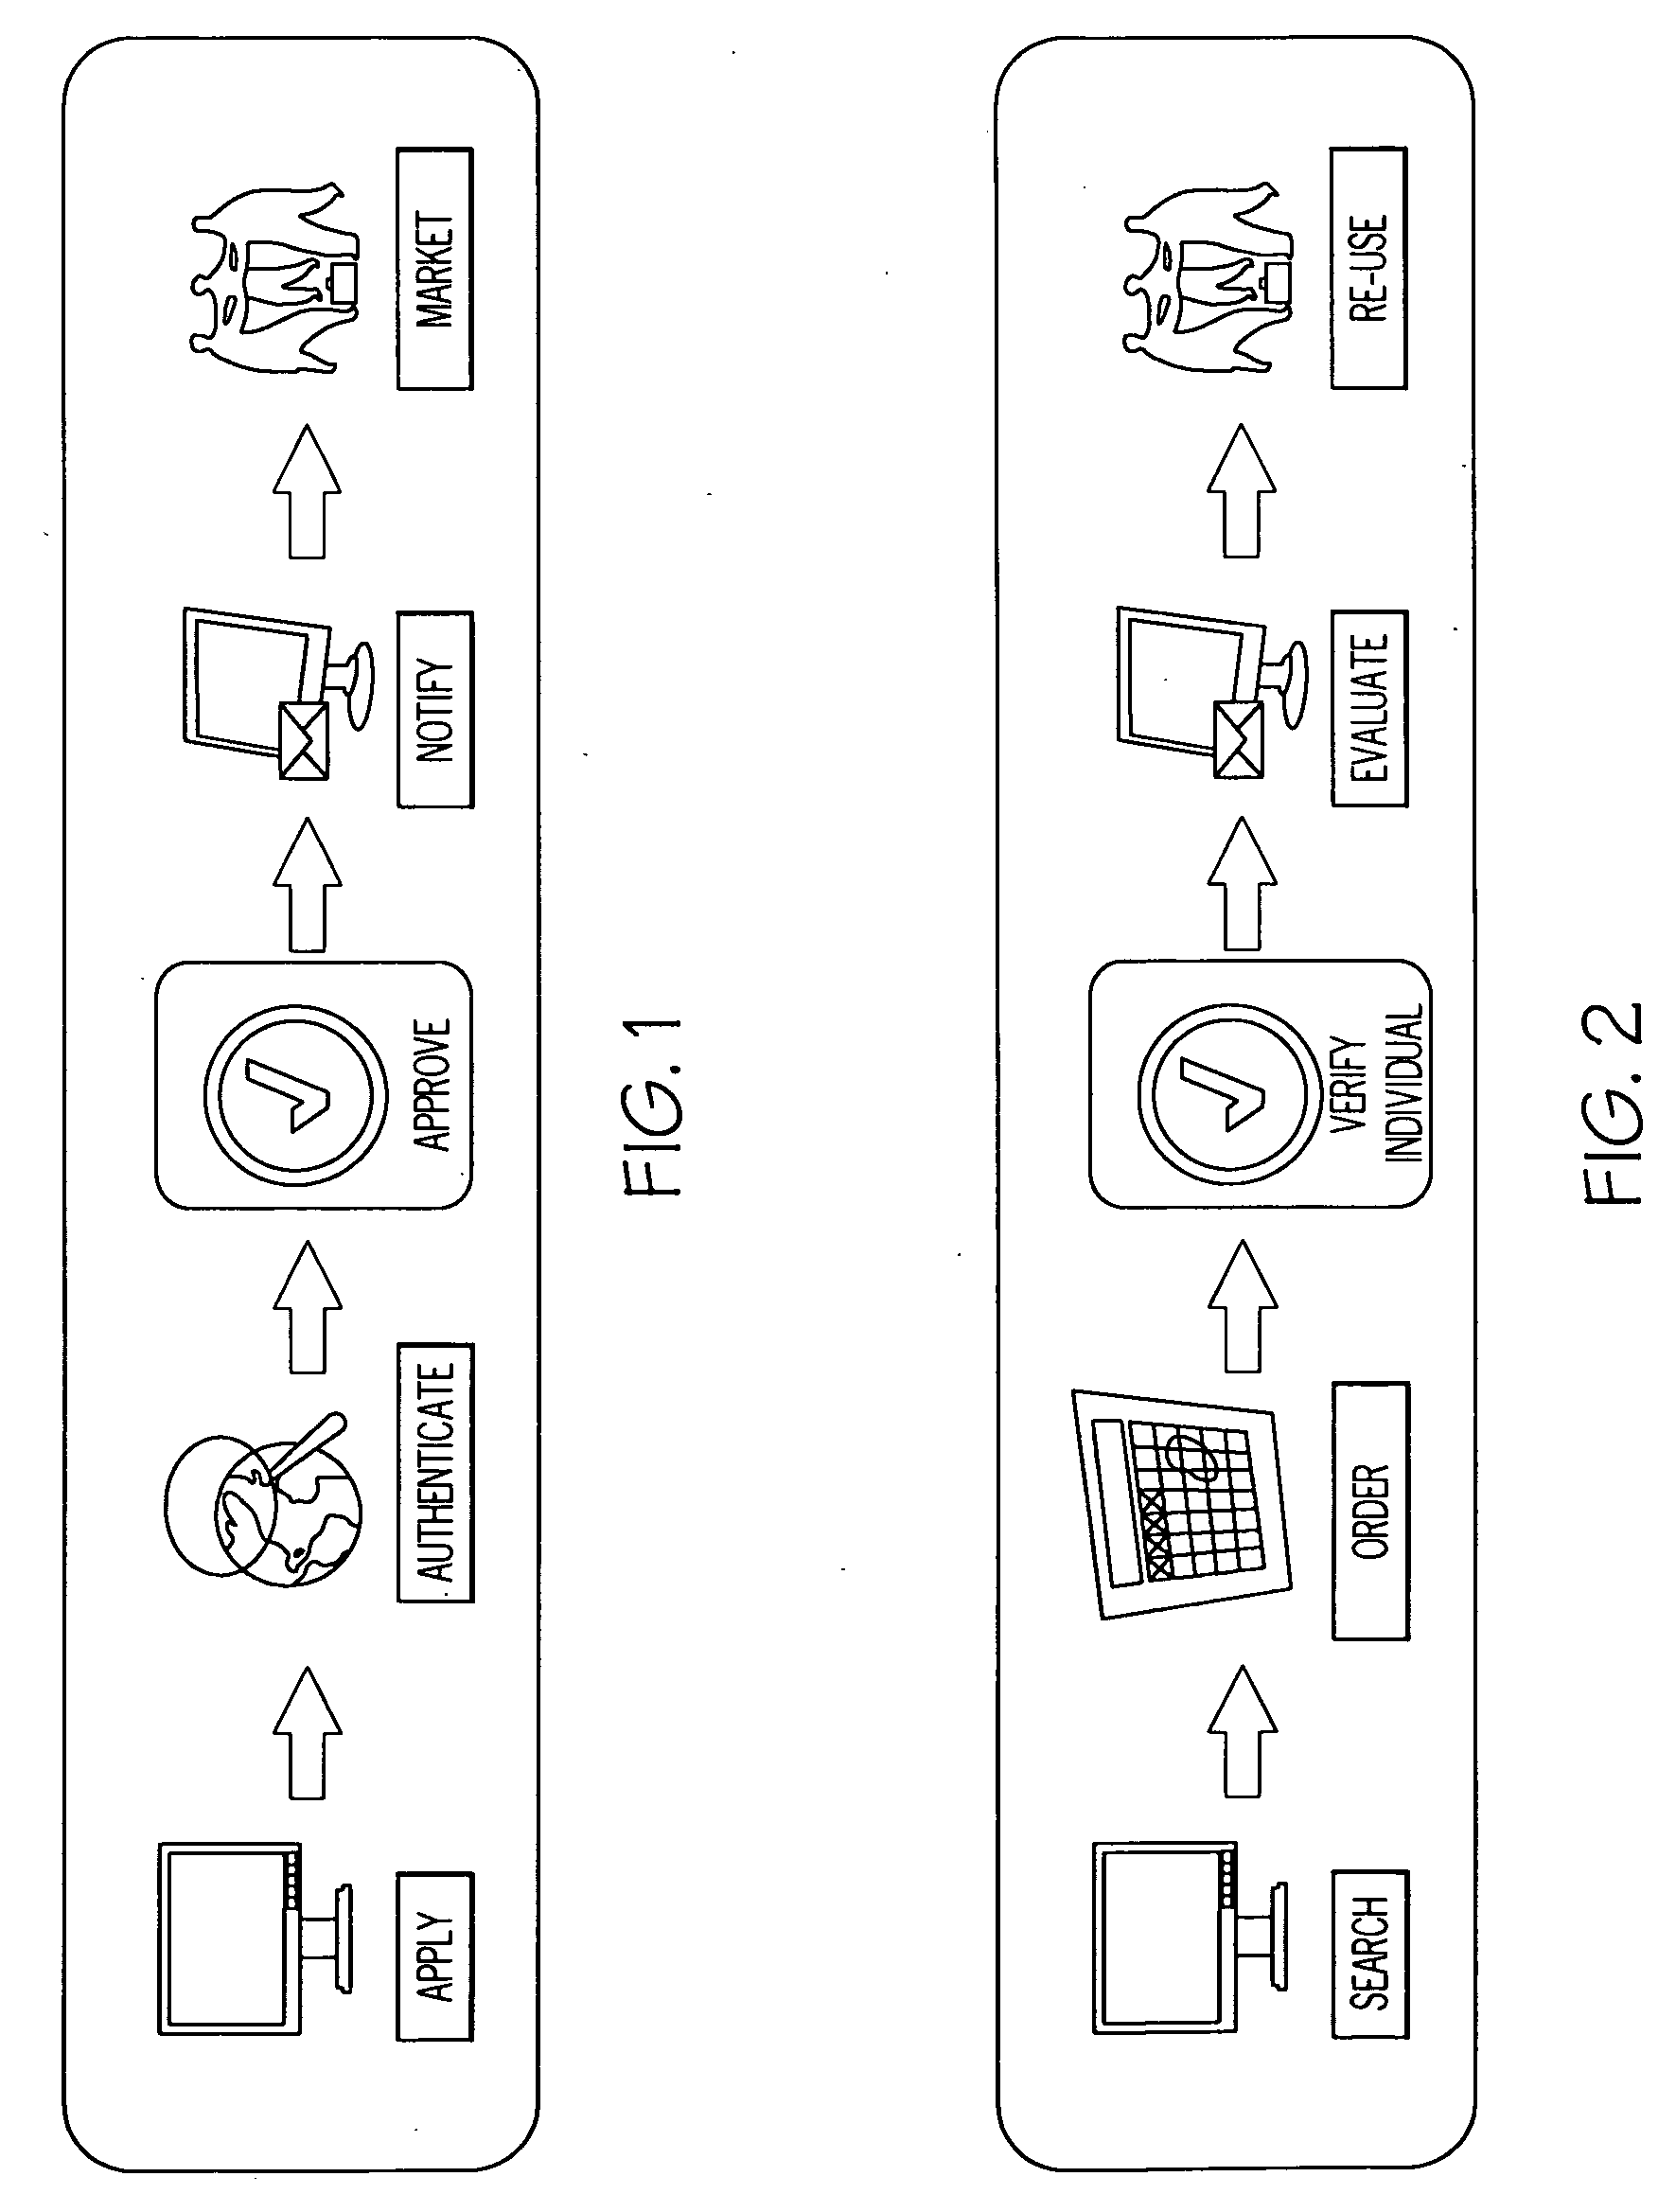 System, method and computer program product for authentication, fraud prevention, compliance monitoring, and job reporting programs and solutions for service providers